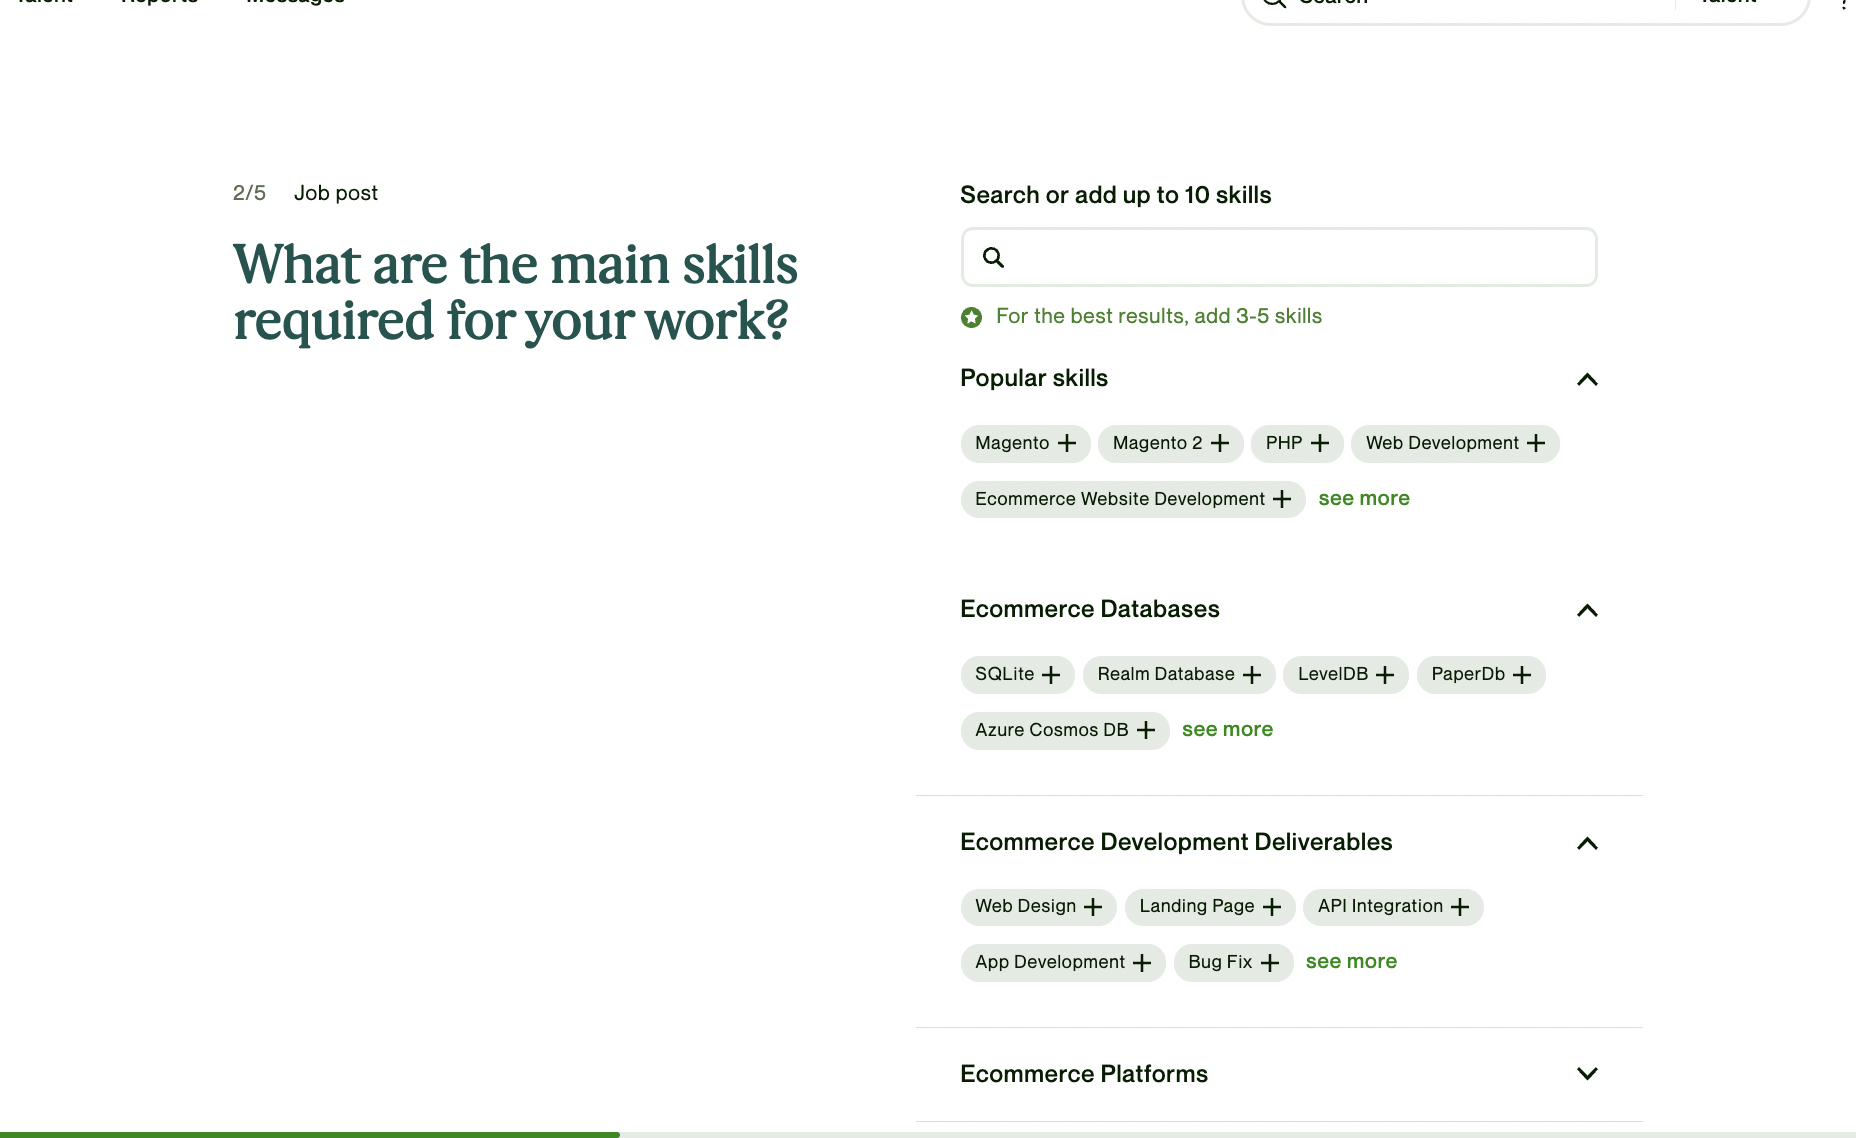 Upwork talent search is broken. What to do?